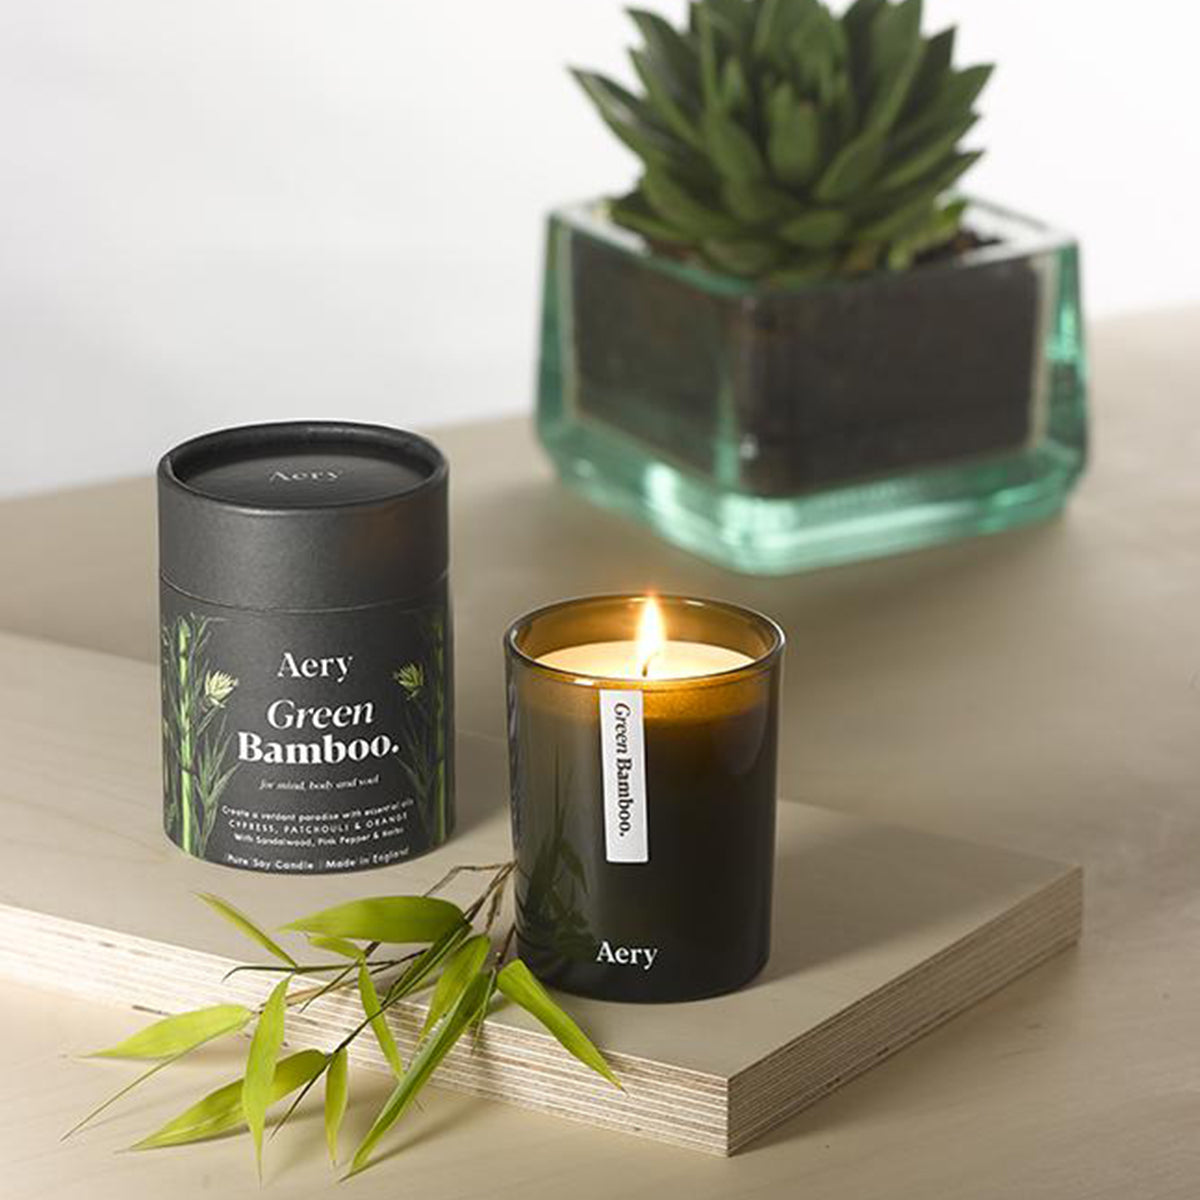 Botanical Green 200g Soy Candle Green Bamboo